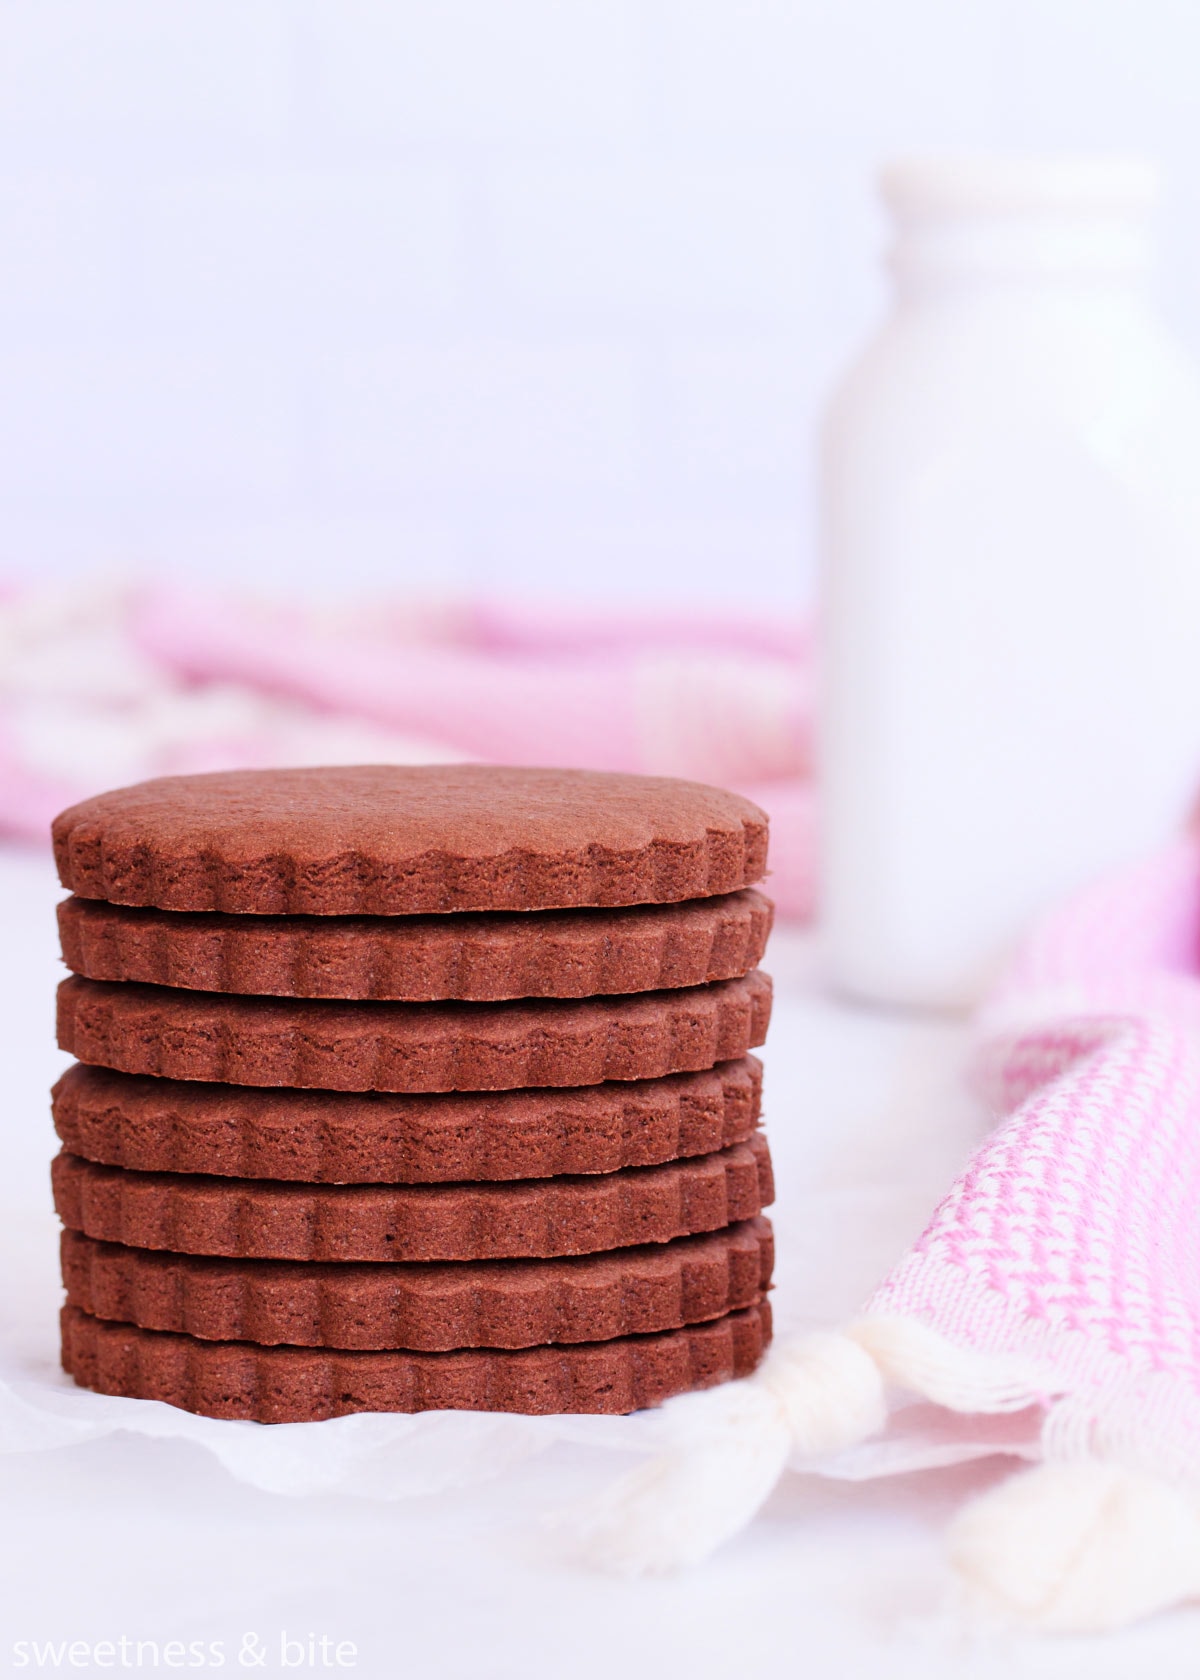 A stack of scalloped-edge round gluten free chocolate cookies, with a purple cloth and a white milk bottle.